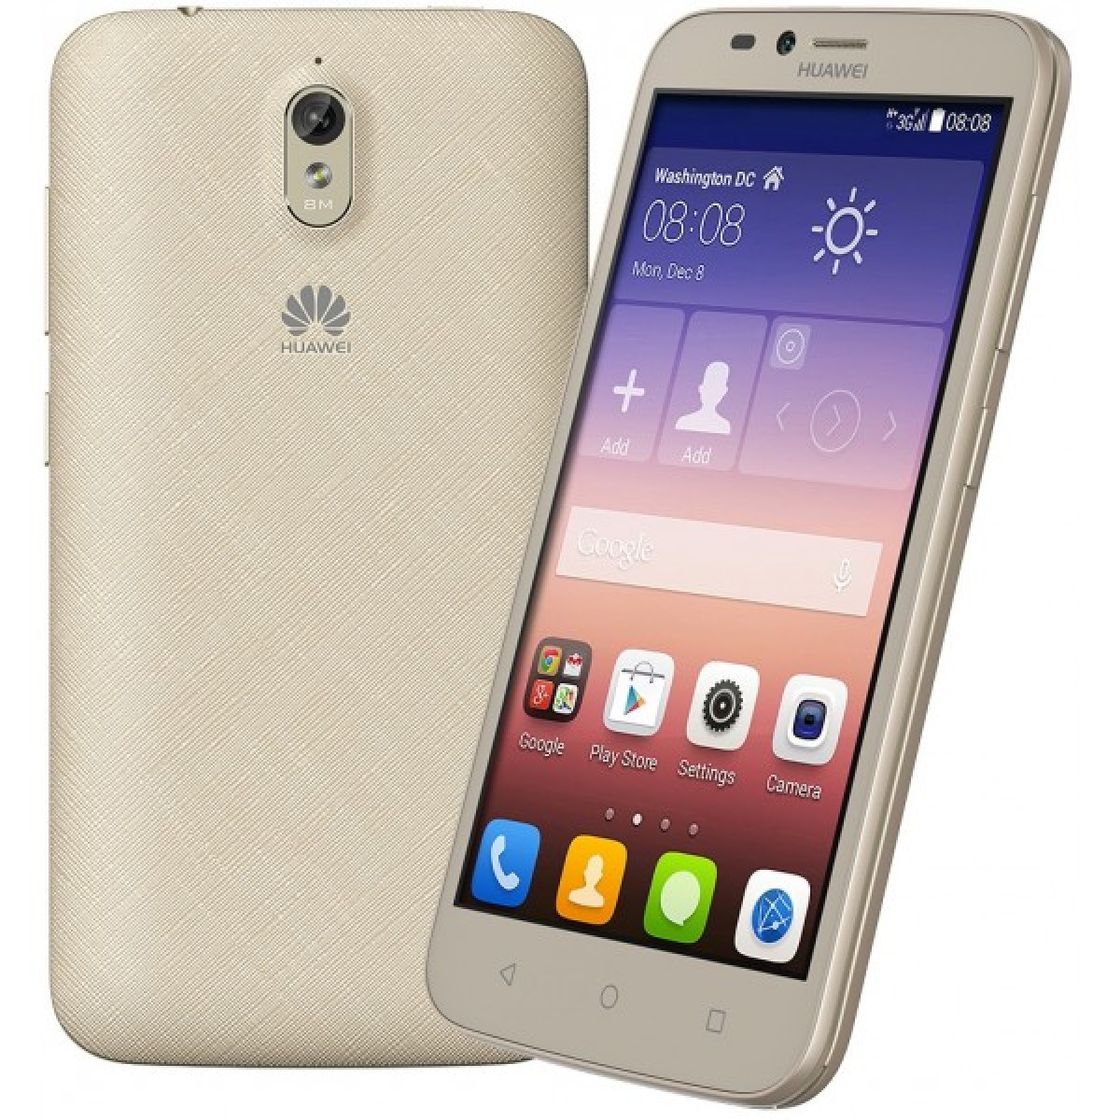 Huawei Y600 White | Android4.2 MTK6572W Dual Core 1.3GHZ Dua… | Flickr